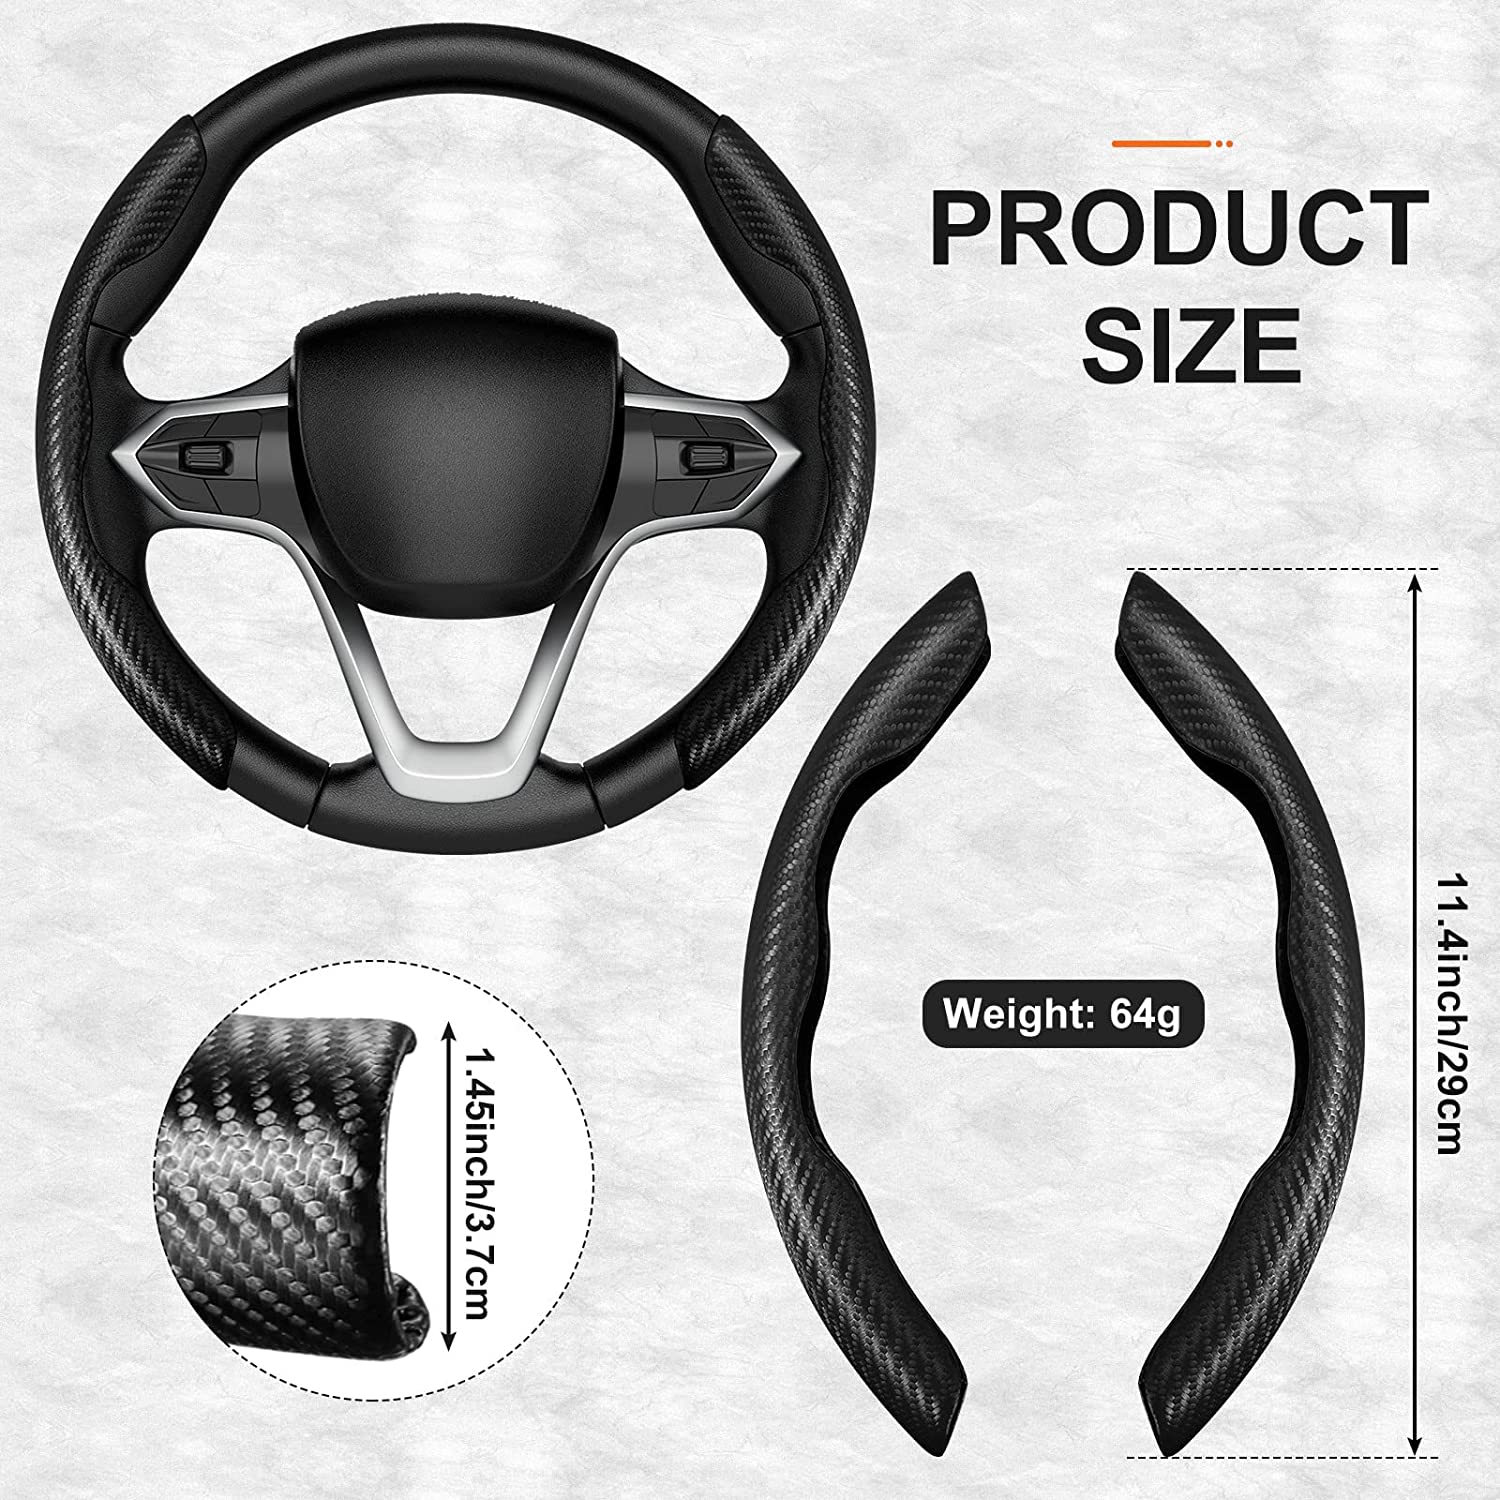 2 Sets Steering Wheel Cover Car Carbon Fiber Steering Wheel Cover for Women and Men Safe and Non Slip Car Accessory, Car Wheel Cover Universal Fit for Most Car Wheel Protector - Delicate Leather